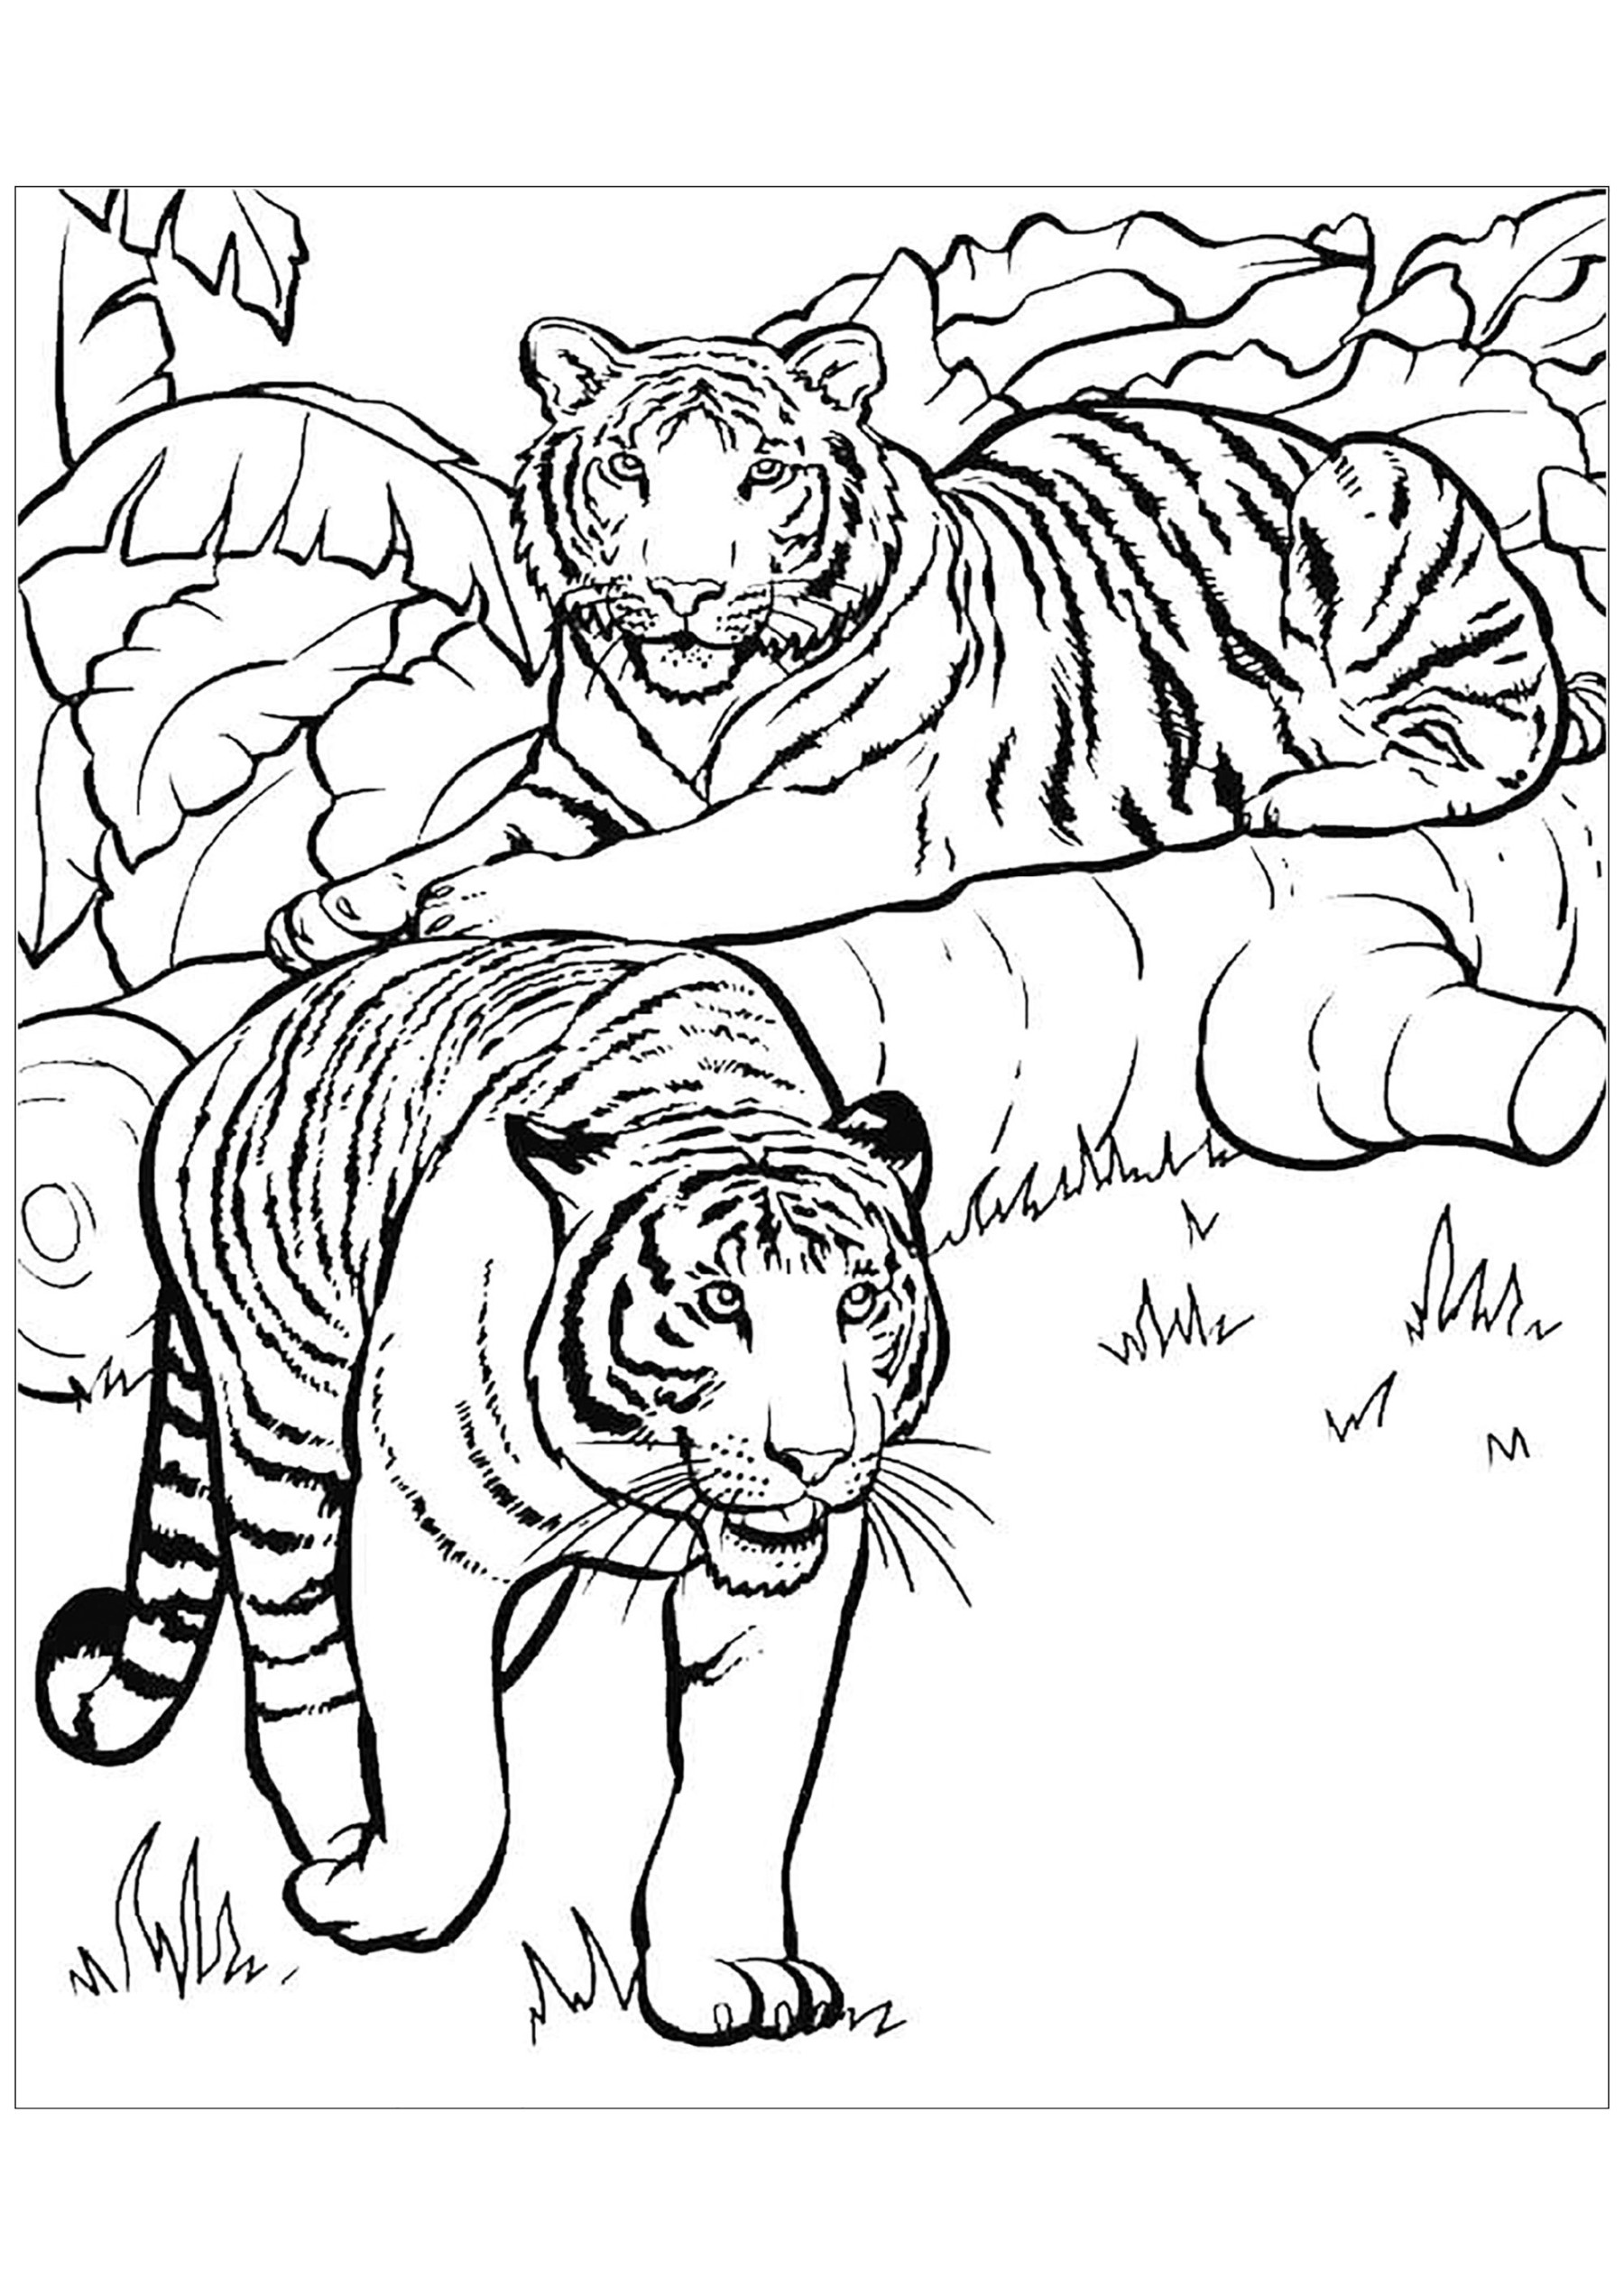 Free tiger drawing to download and color - Tigers Kids Coloring Pages